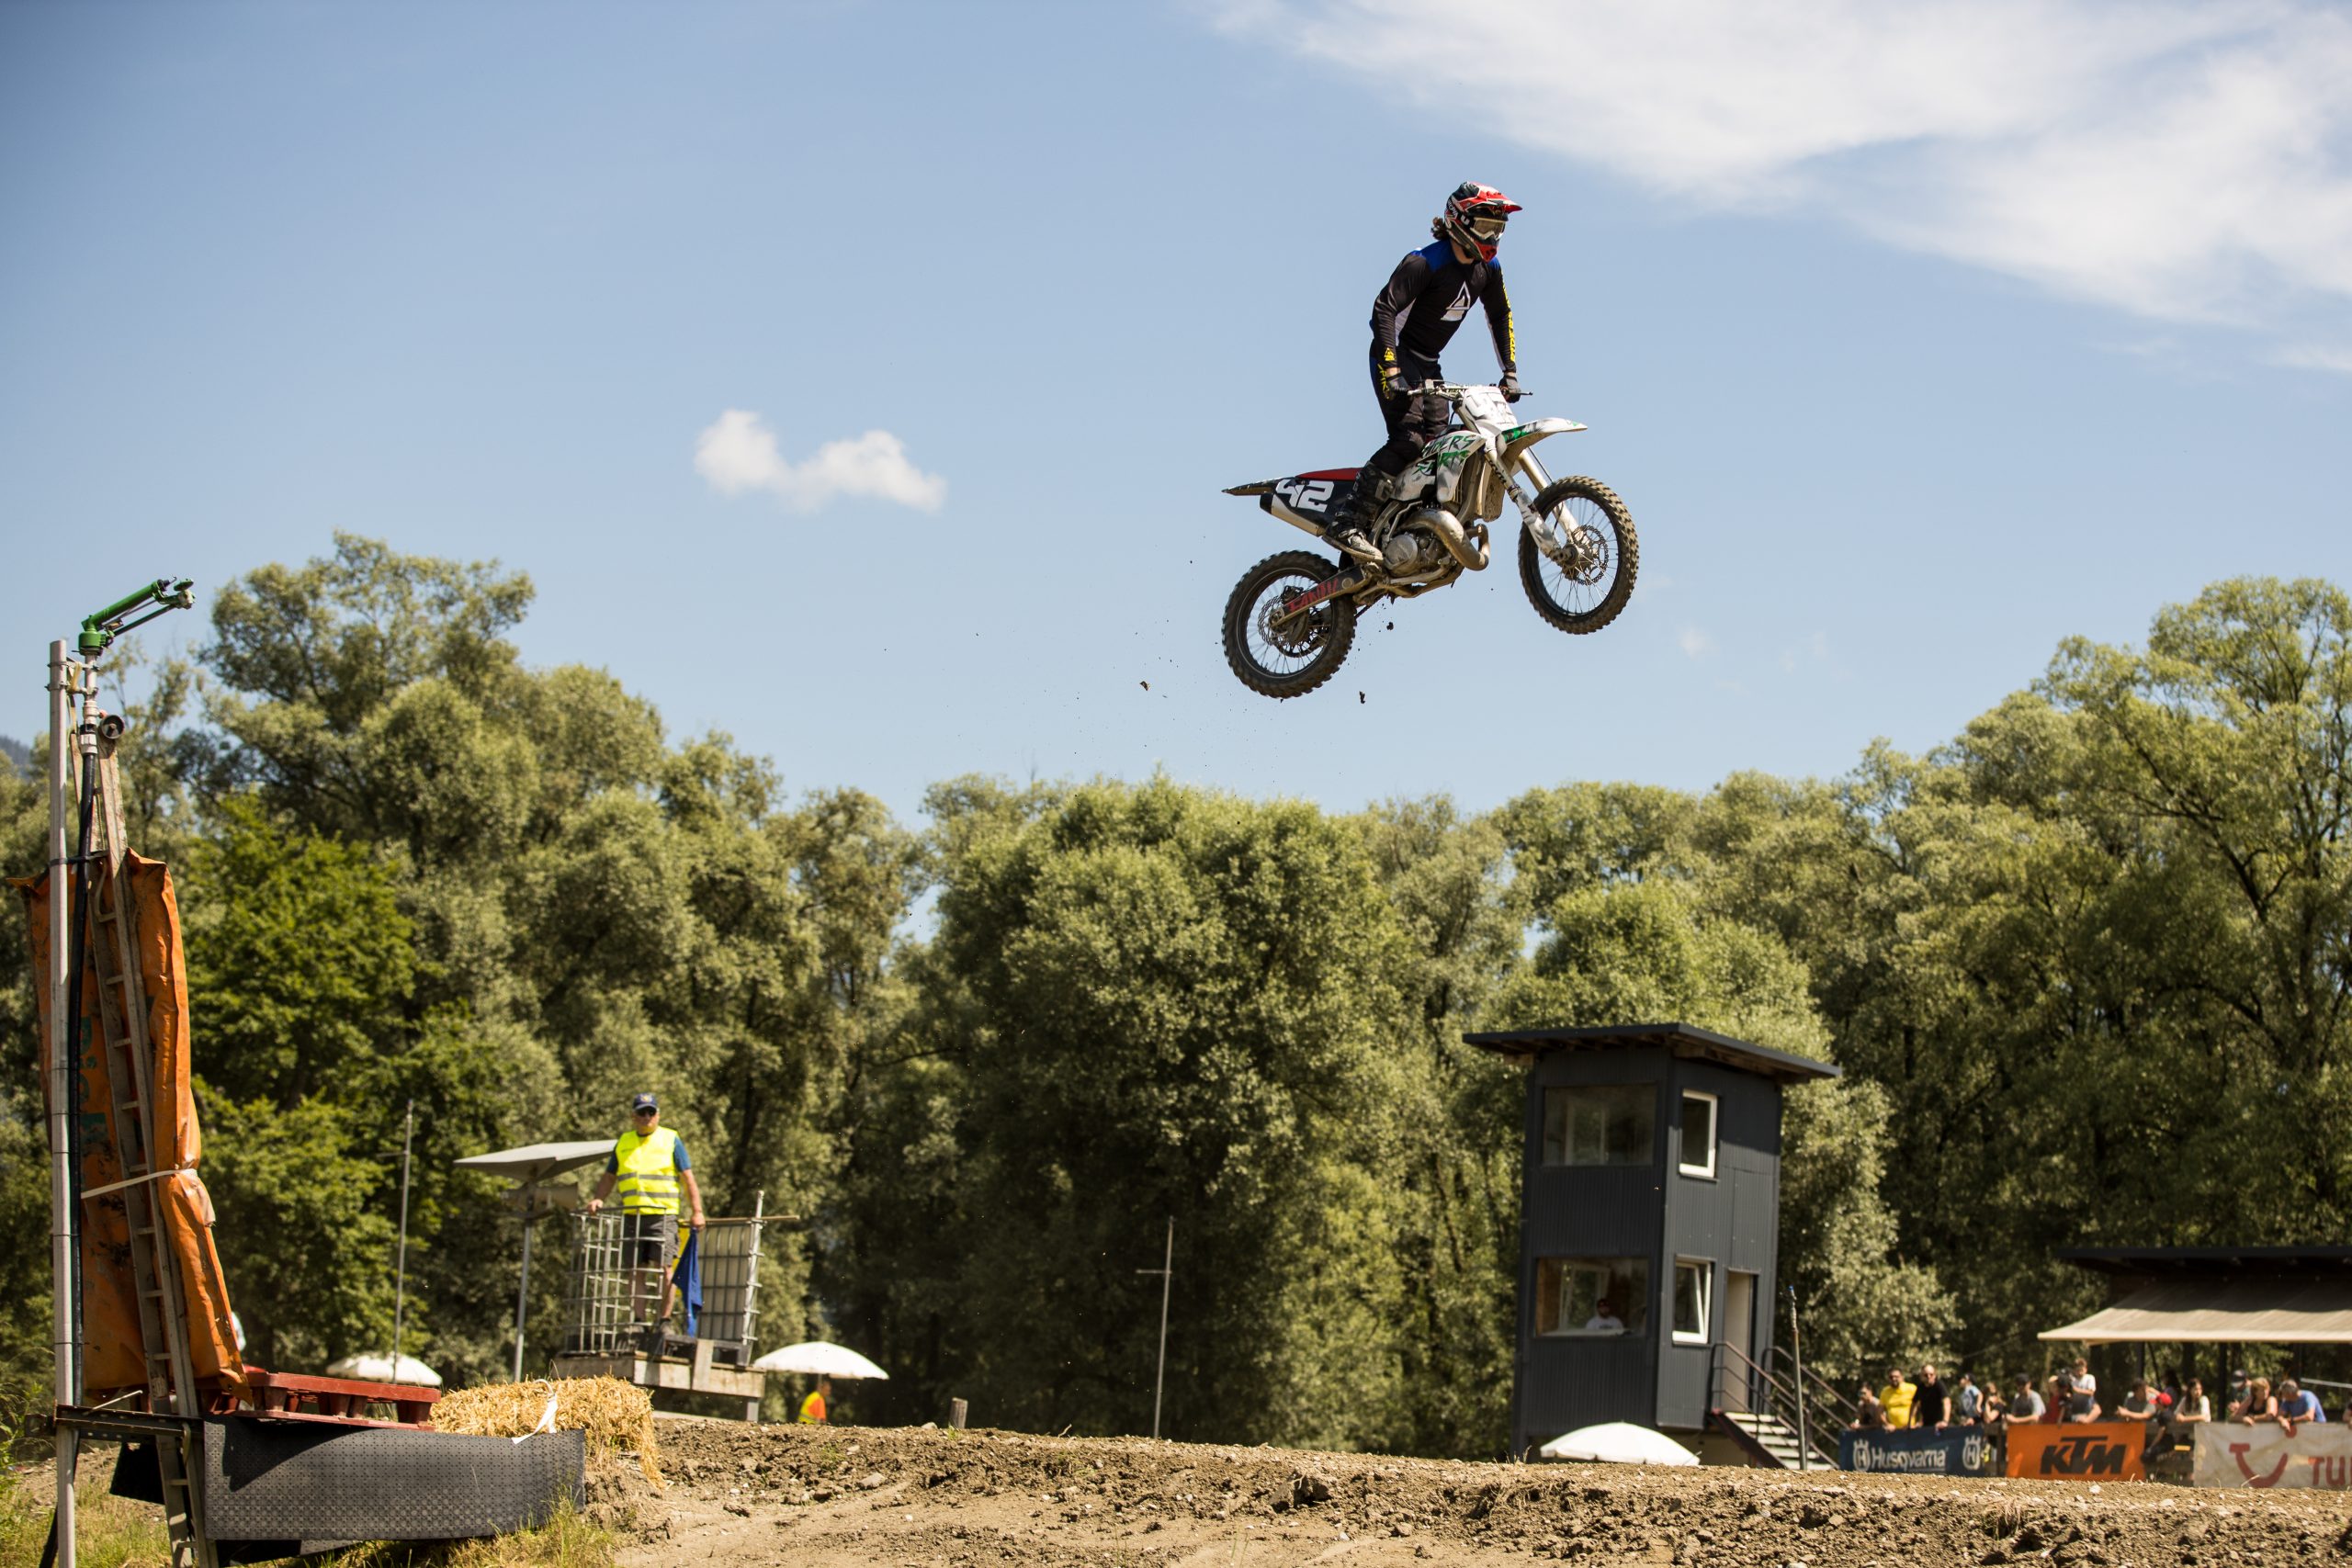 Richi Kreidl flying high on his home track in Kundl